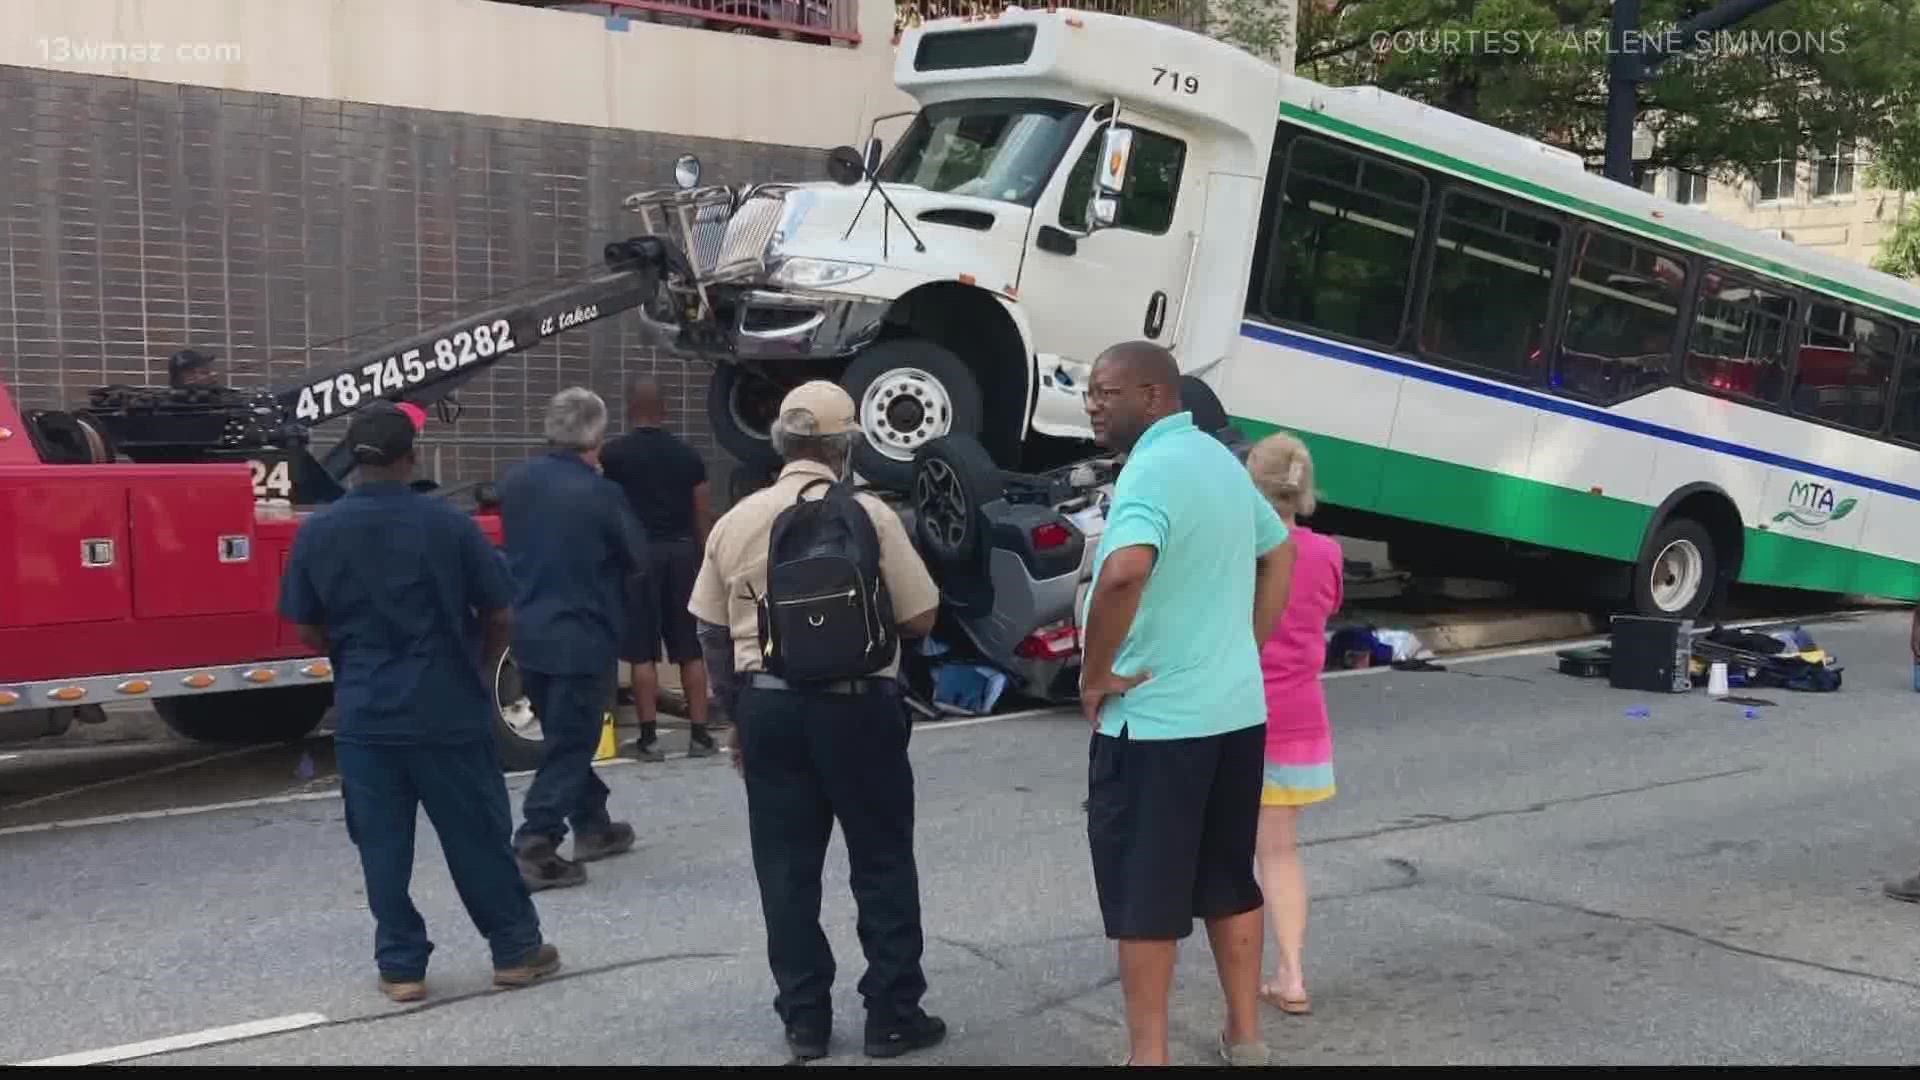 A crash report from the Bibb Sheriff's Office shows the driver of a Subaru SUV was making a left turn from MLK onto Cherry Street and the bus ran the red light